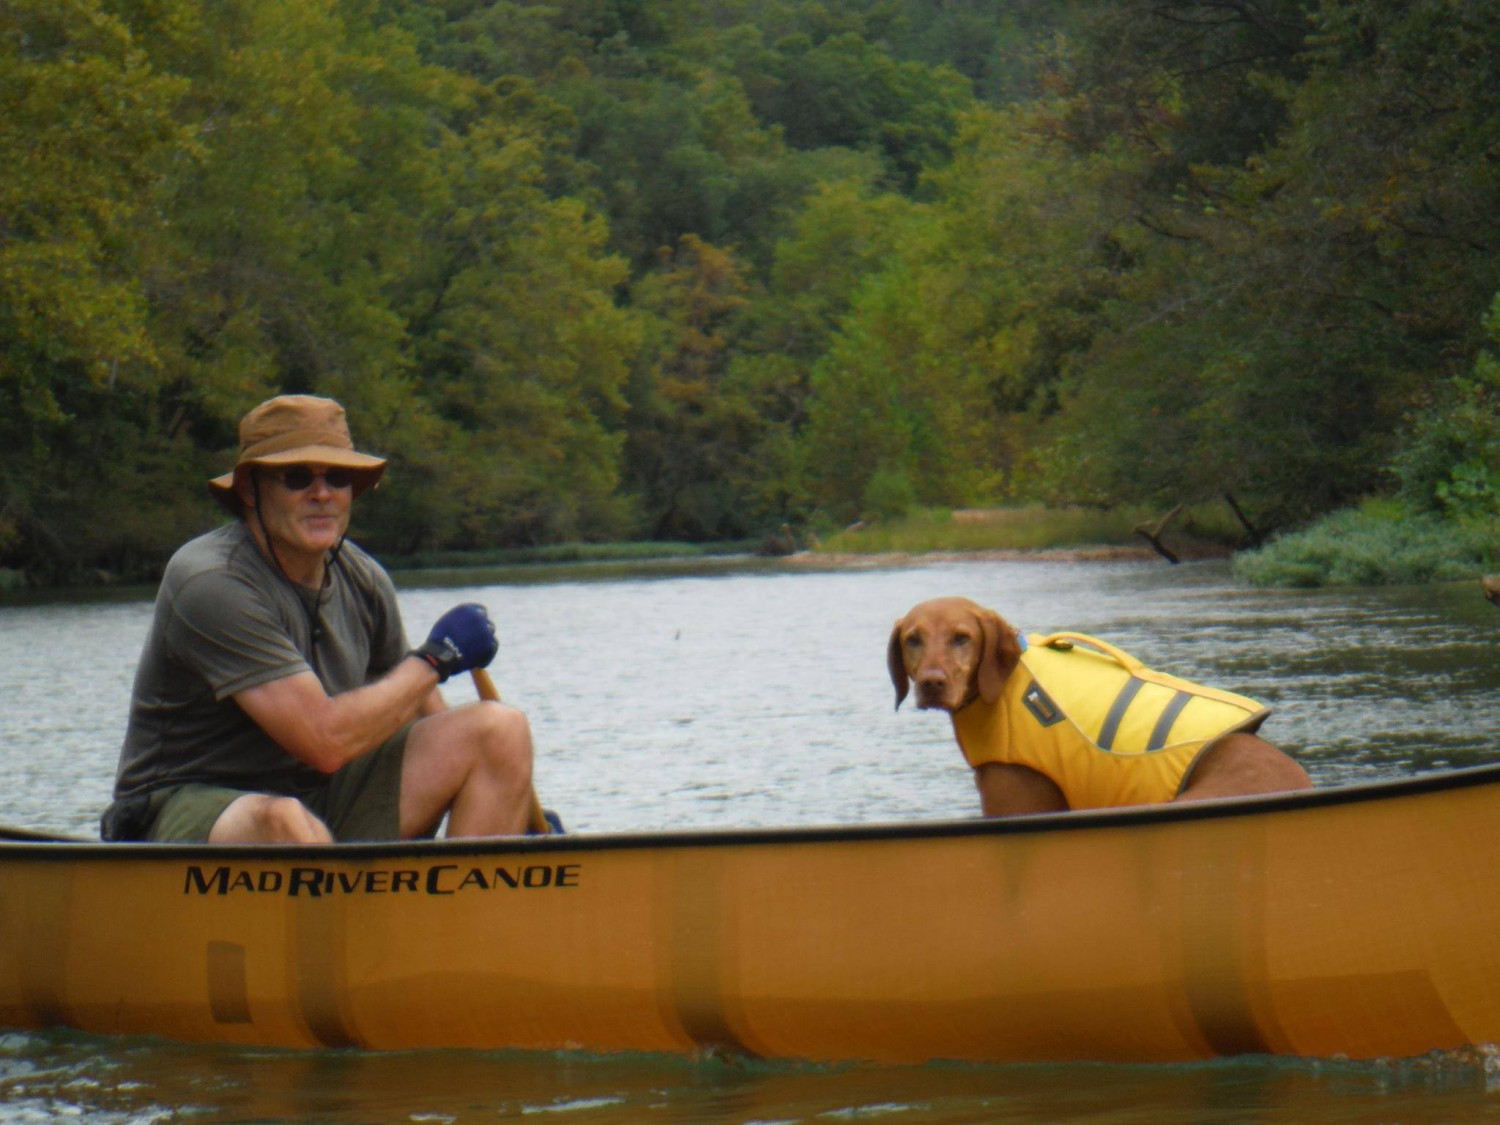 Dr. Langley and Dog in Canoe